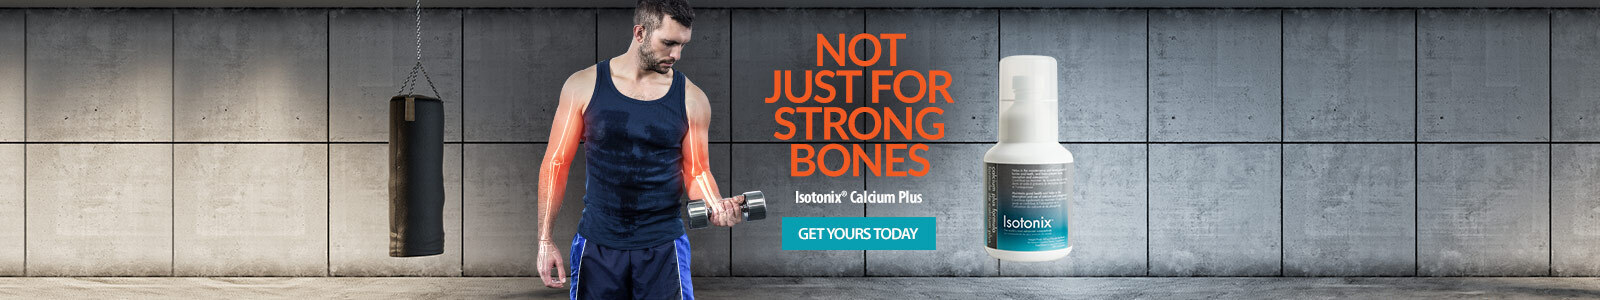 Isotonix Calcium Plus. Not just for Strong Bones. Get yours today